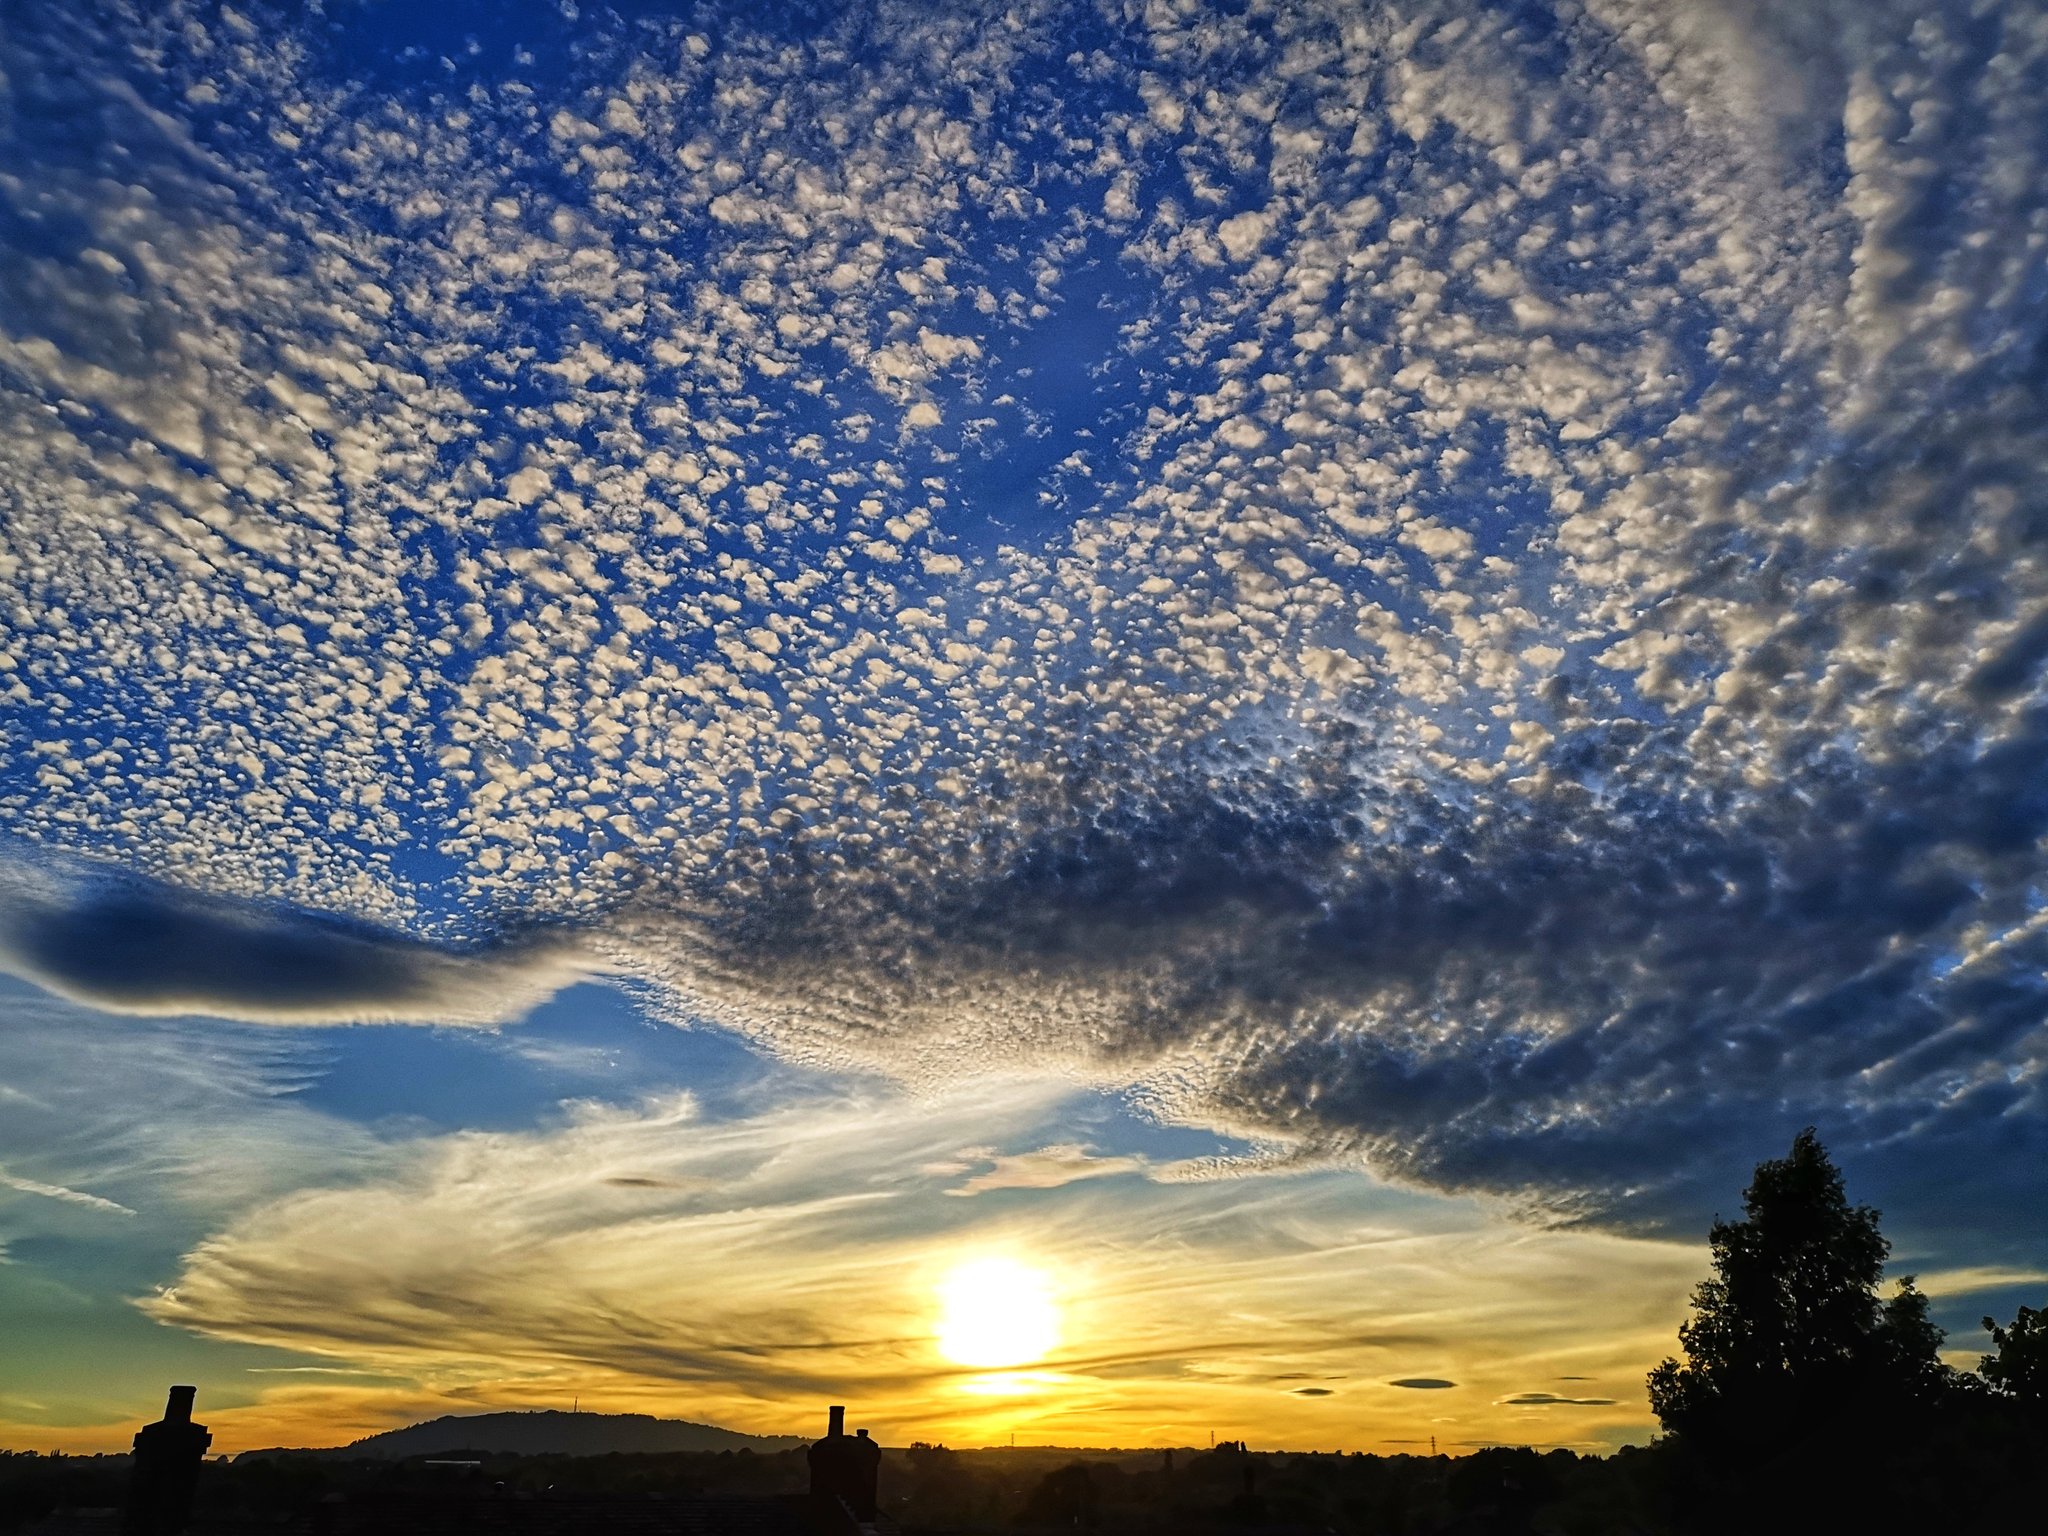 1st Place Stunning altocumulus clouds over Telford, Shropshire during sunset by Liam Ball @Liam_Ball92